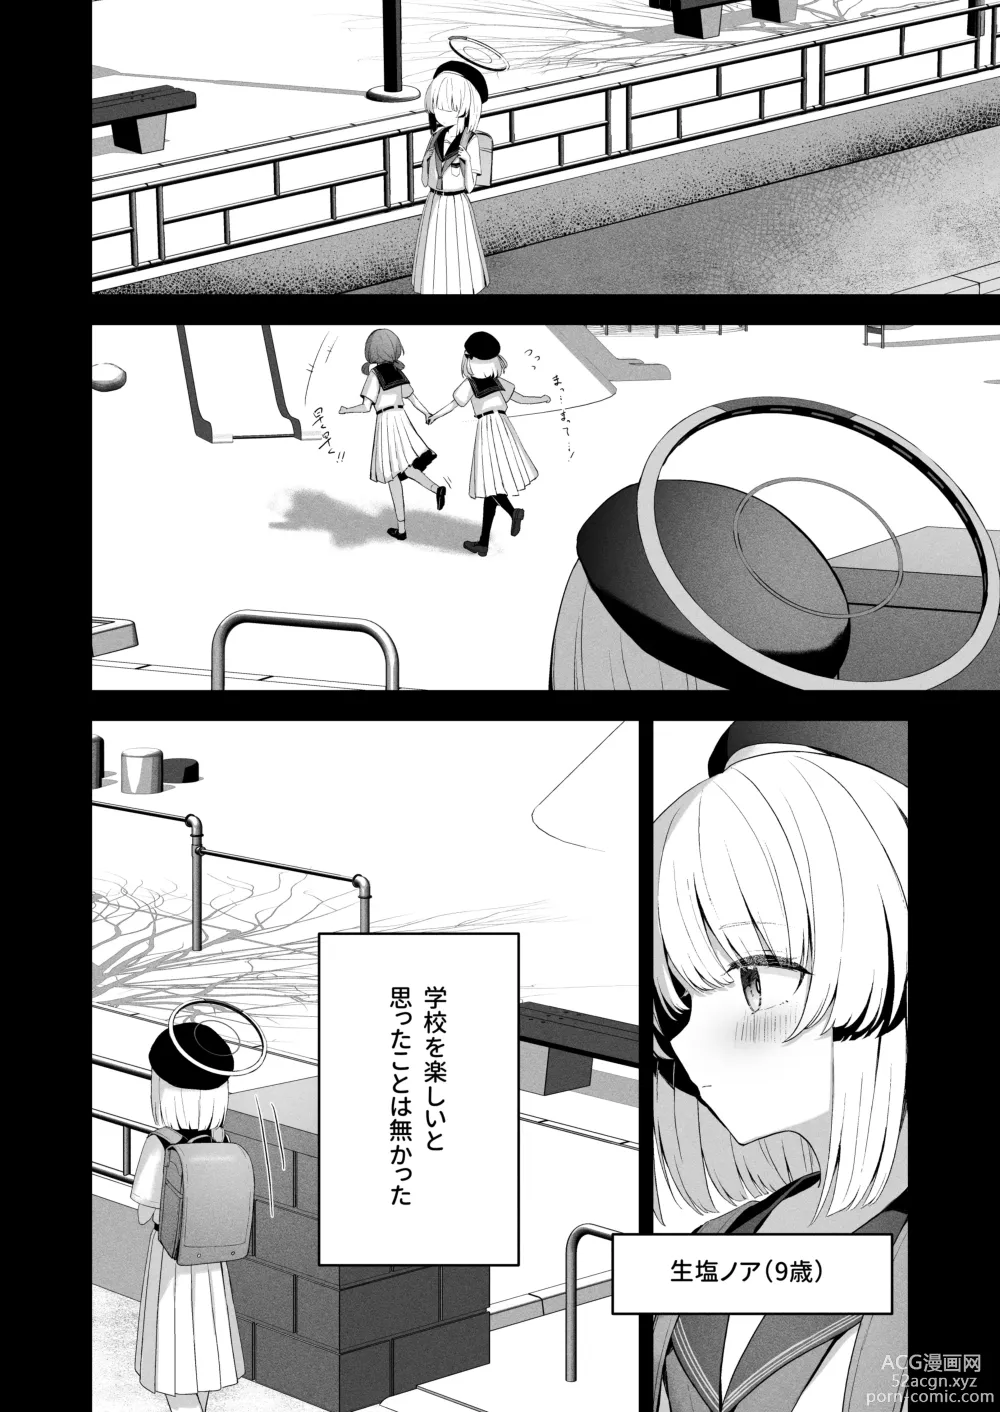 Page 7 of doujinshi Answers